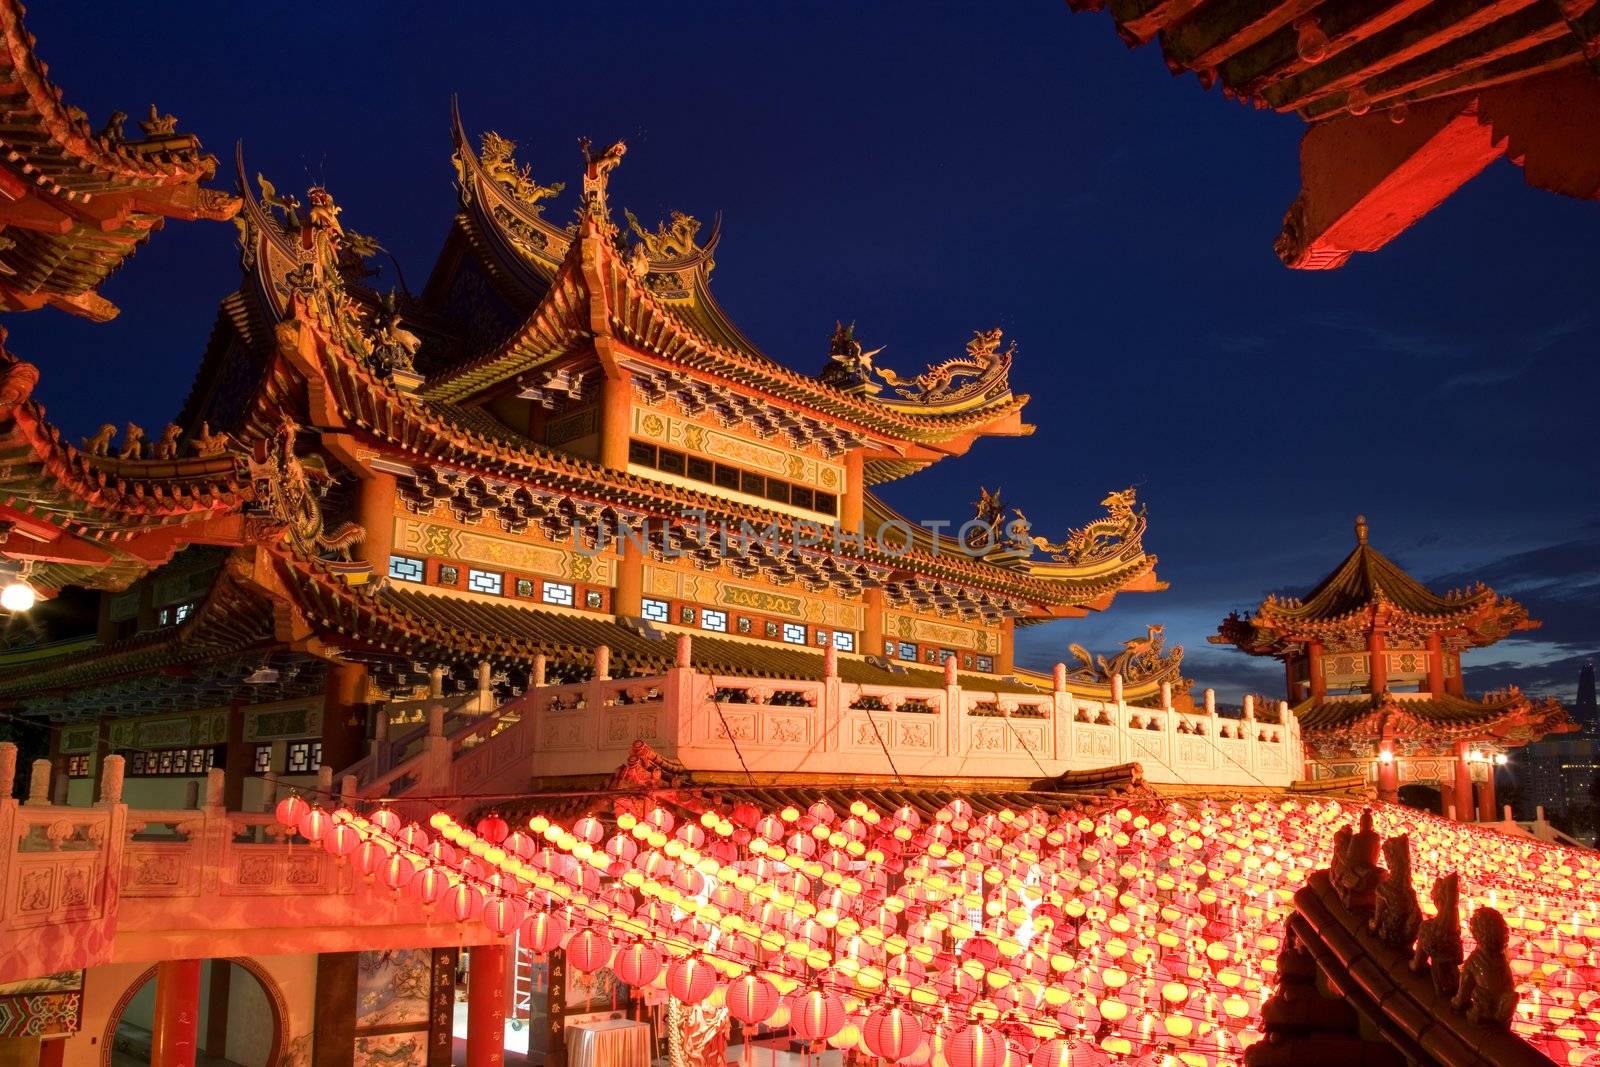 Image of a Chinese temple in Malaysia at dusk.